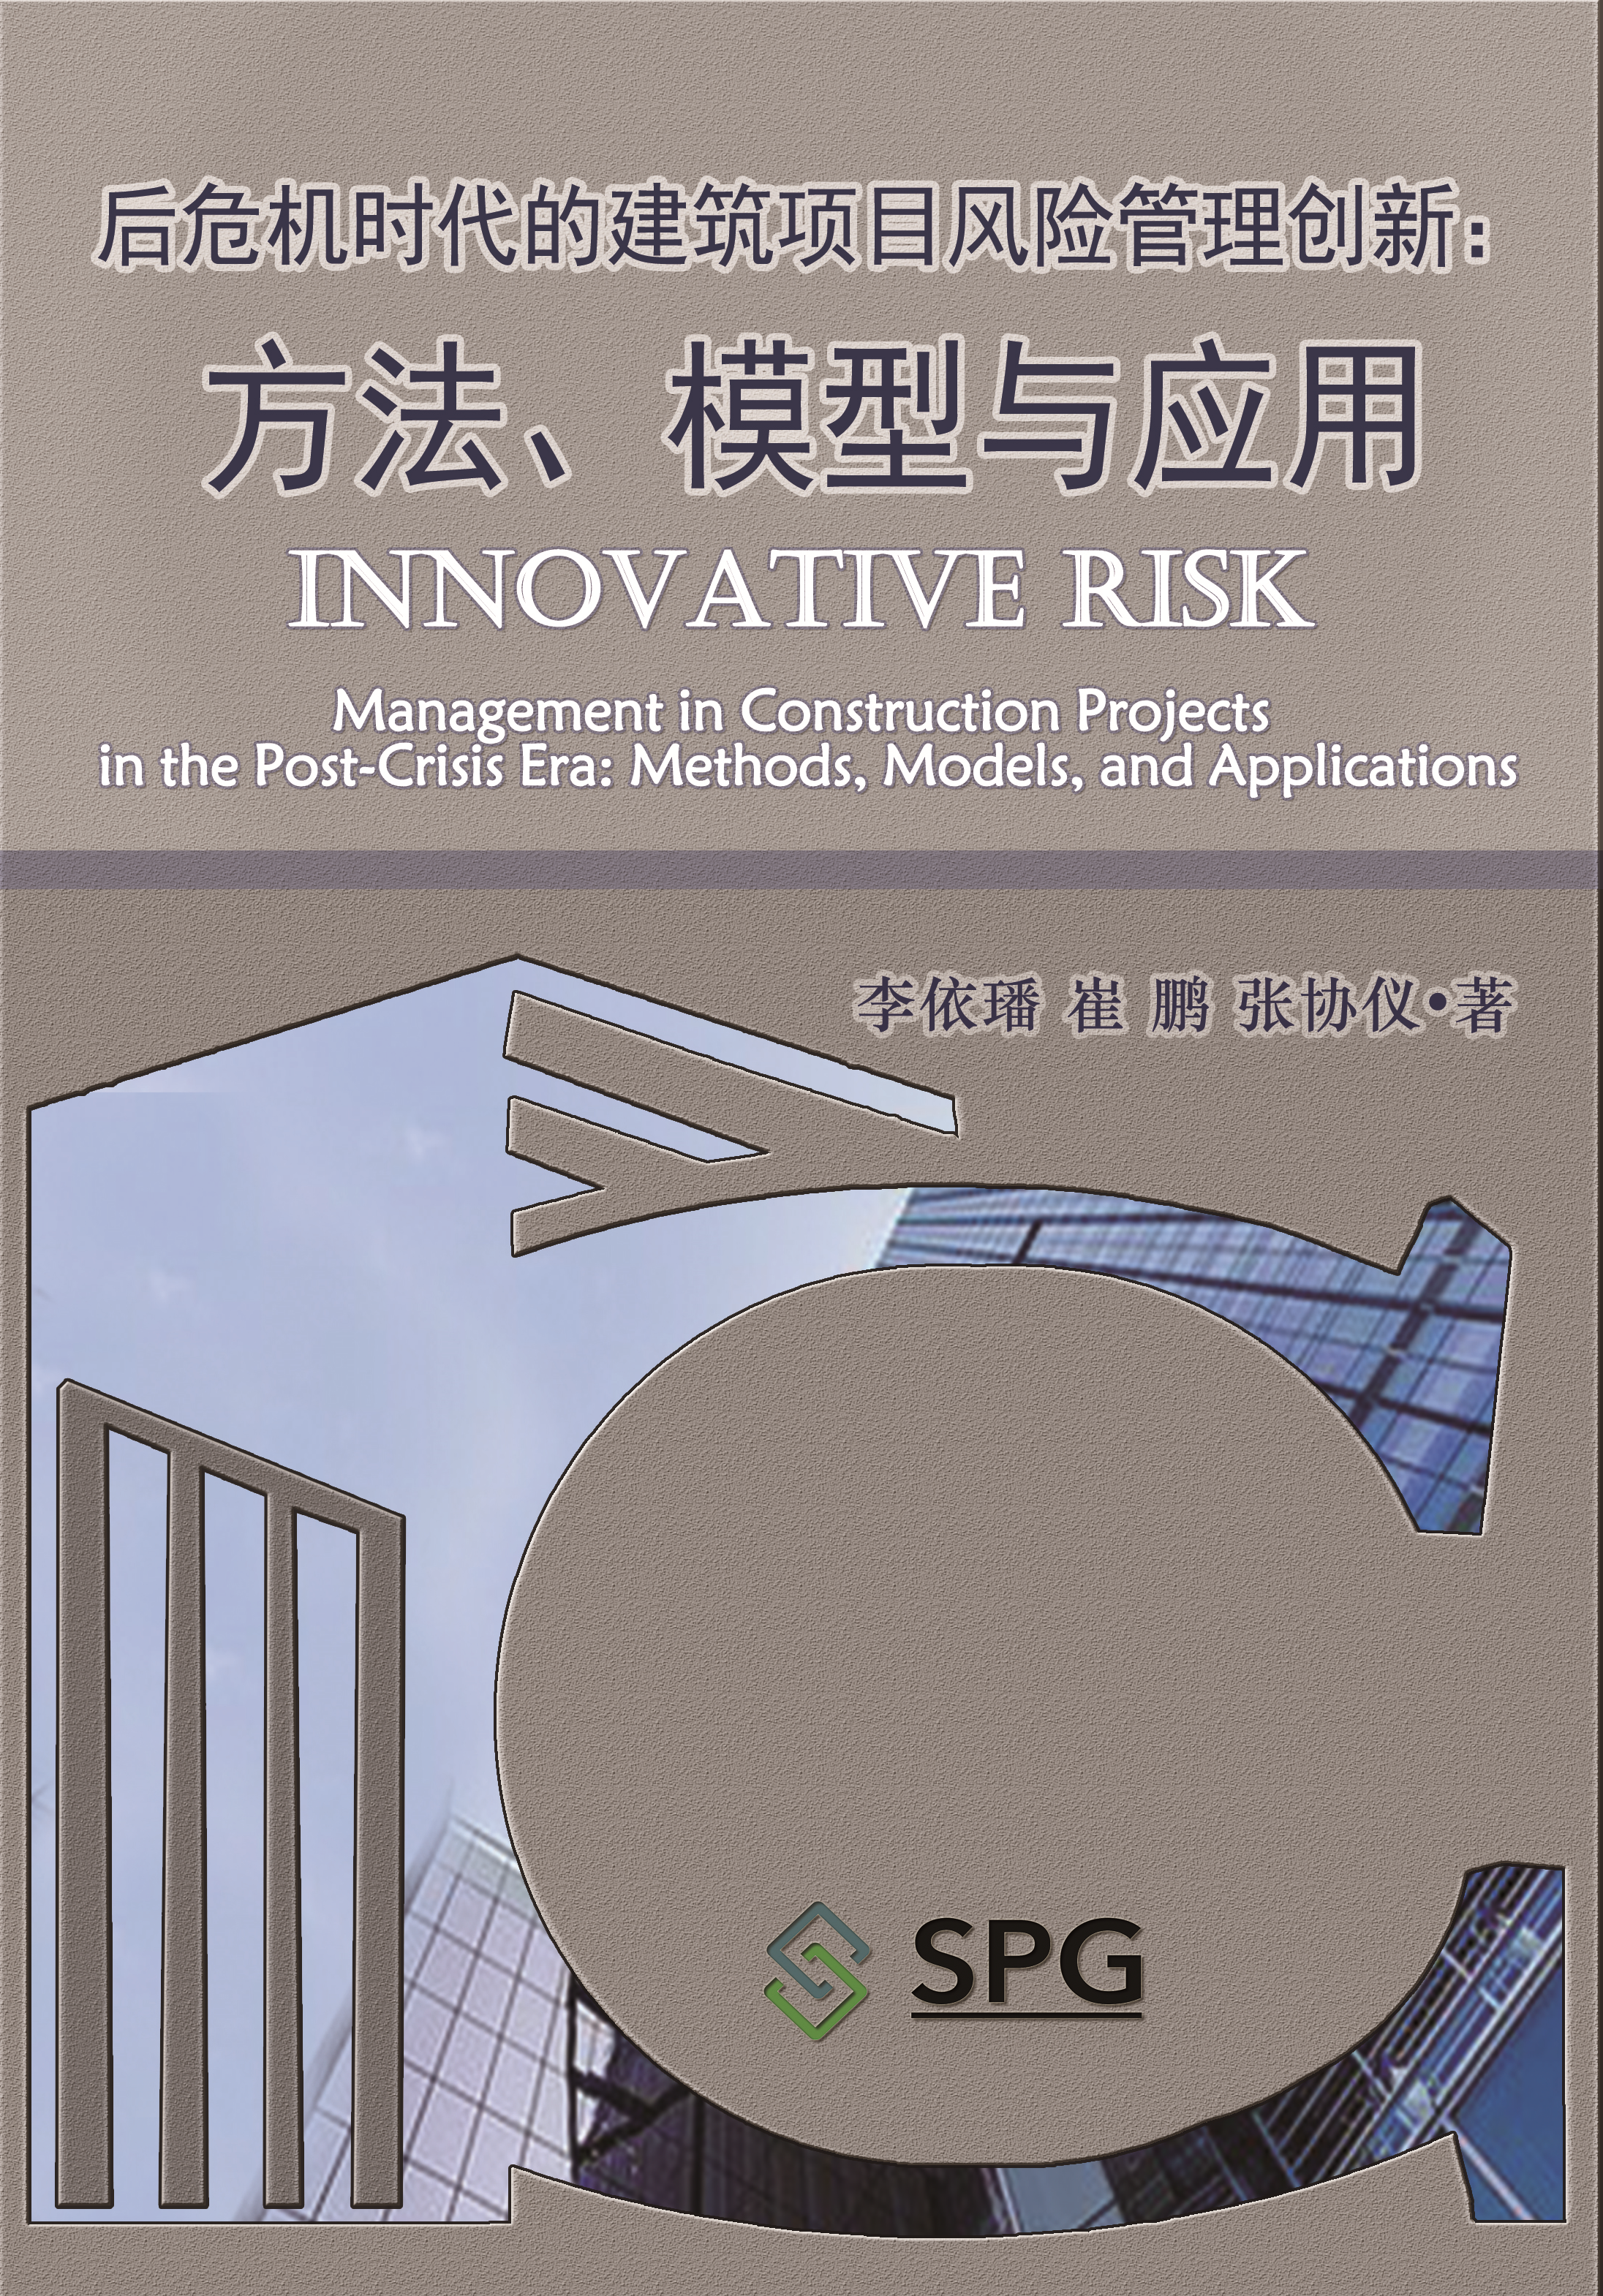 Innovative Risk Management in Construction Projects in the Post-Crisis Era: Methods, Models, and Applications | Scholar Publishing Group